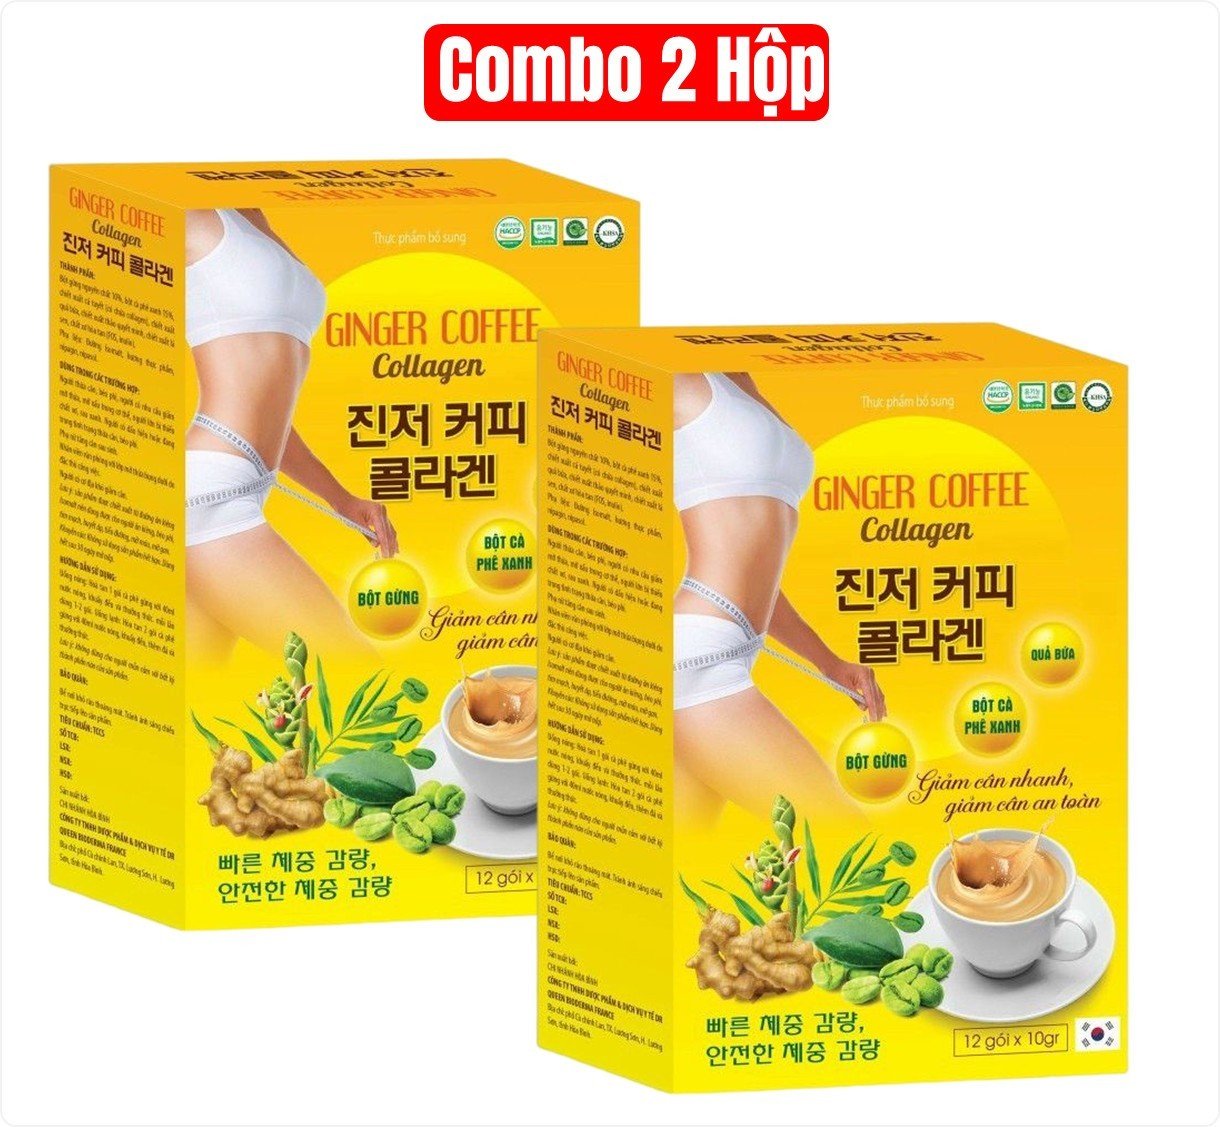 Combo 2 hộp Cafe Gừng Ginger Coffee Collagen Hỗ trợ giảm mỡ thừa